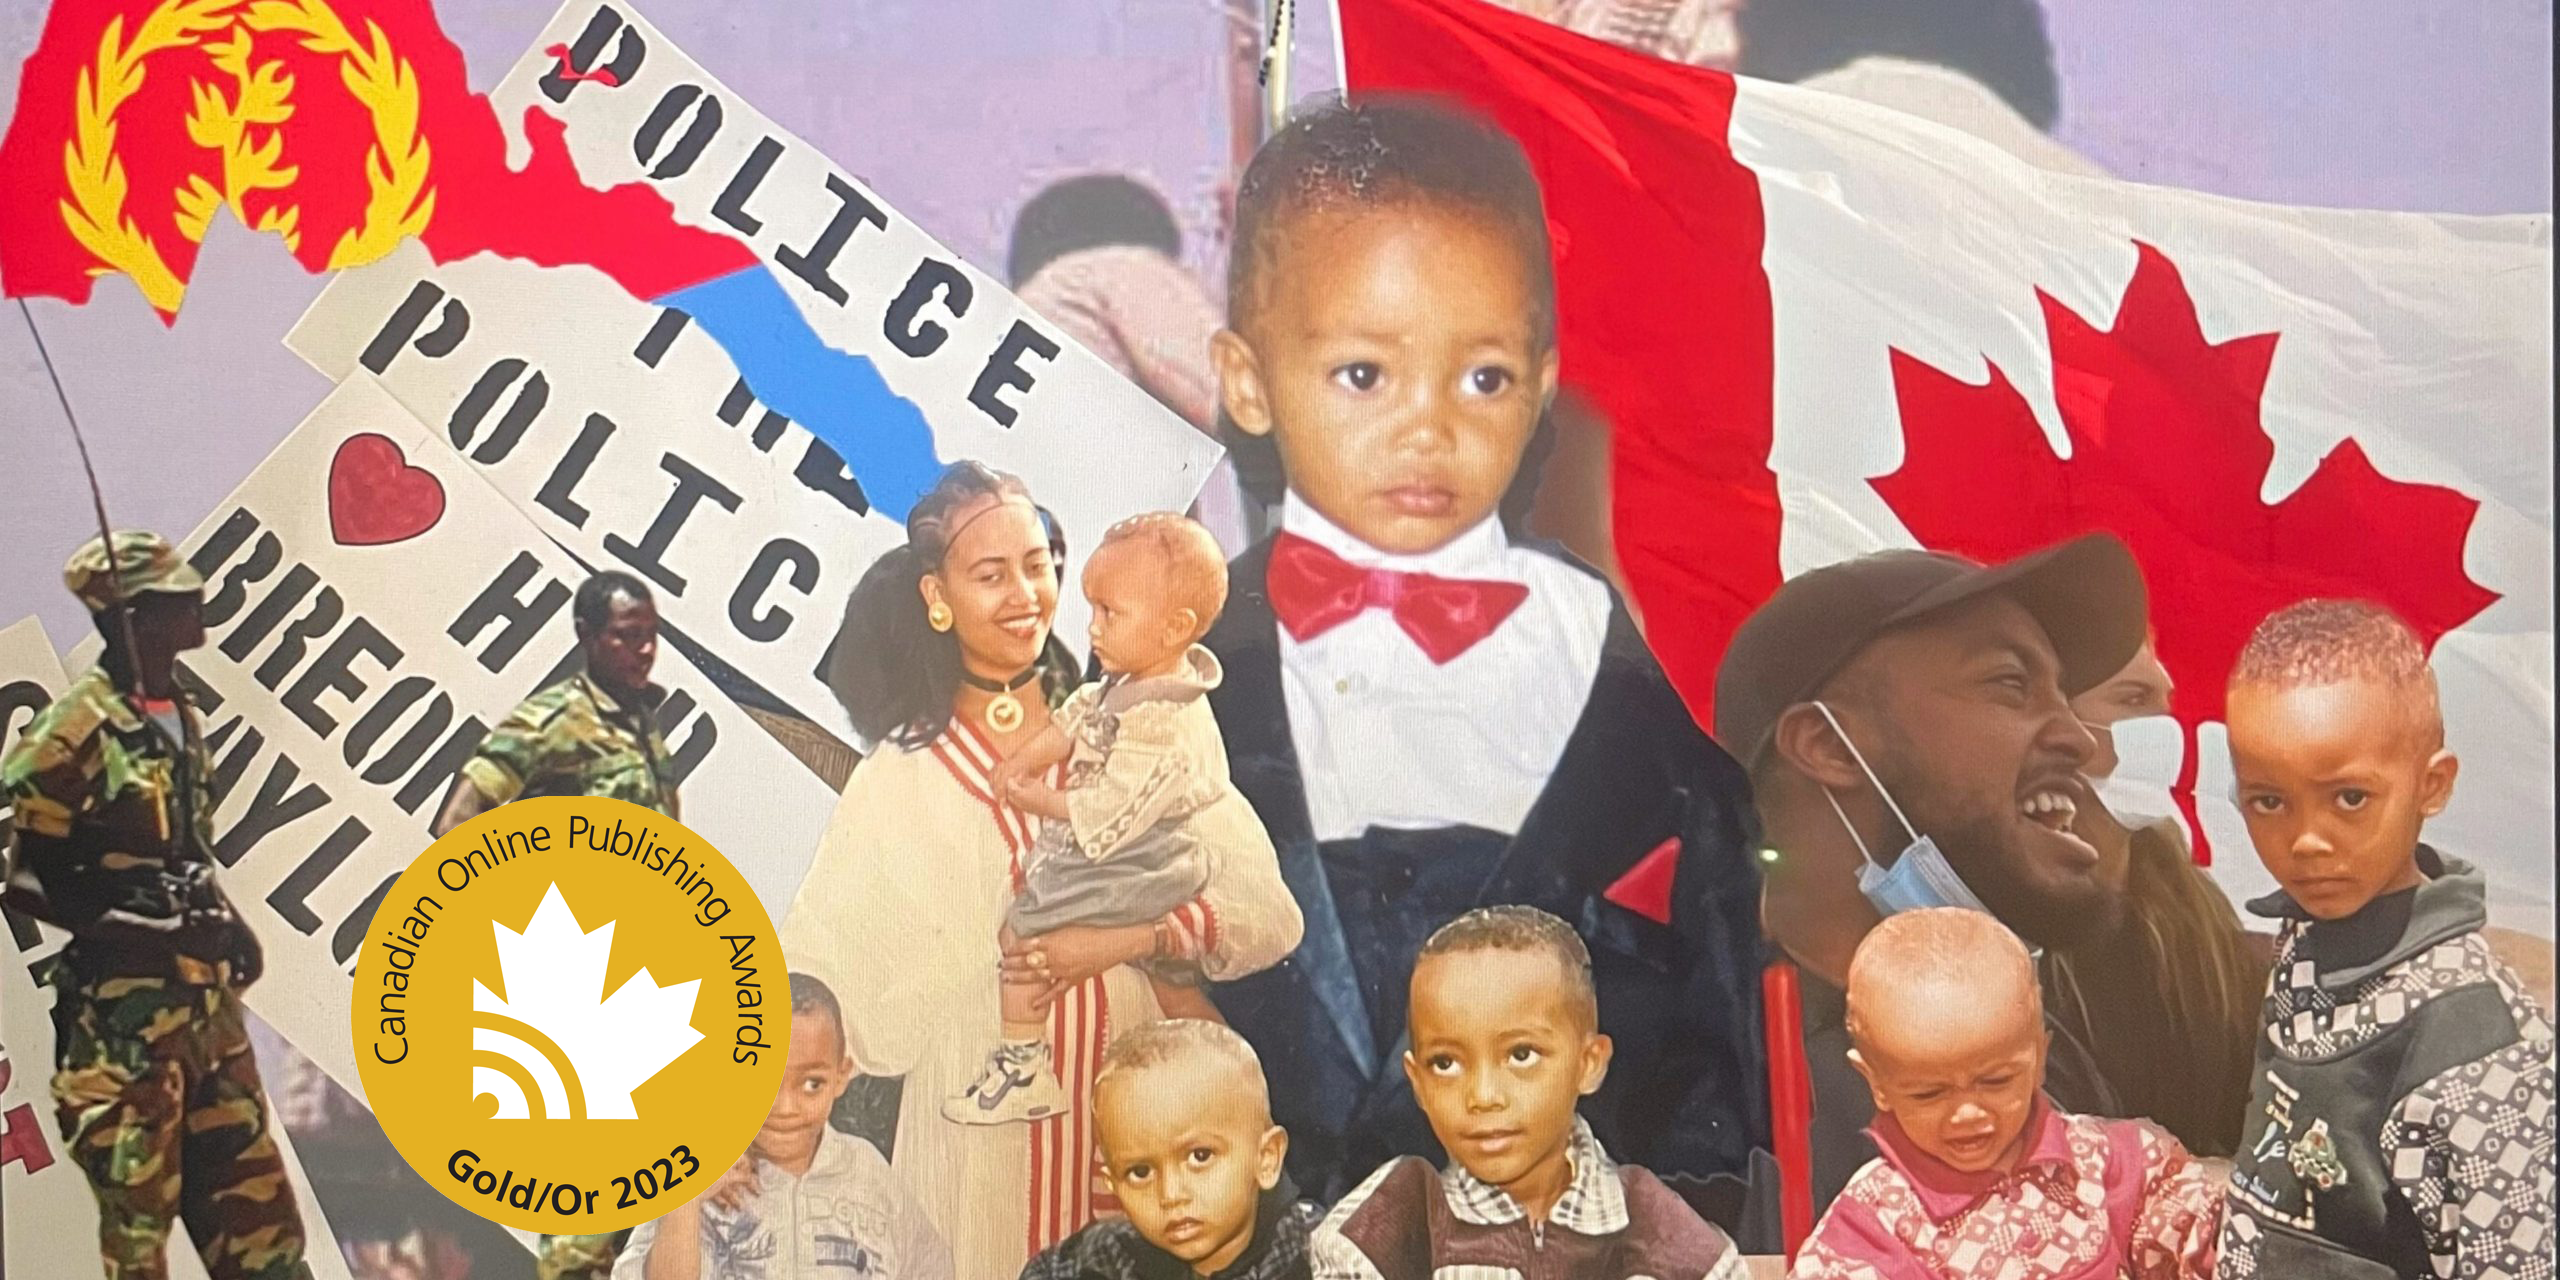 A collage of an Eritrean family, soldiers, protest signs, and a Canadian flag, with a "Canadian Online Publishing Awards Gold/Or 2023" logo.